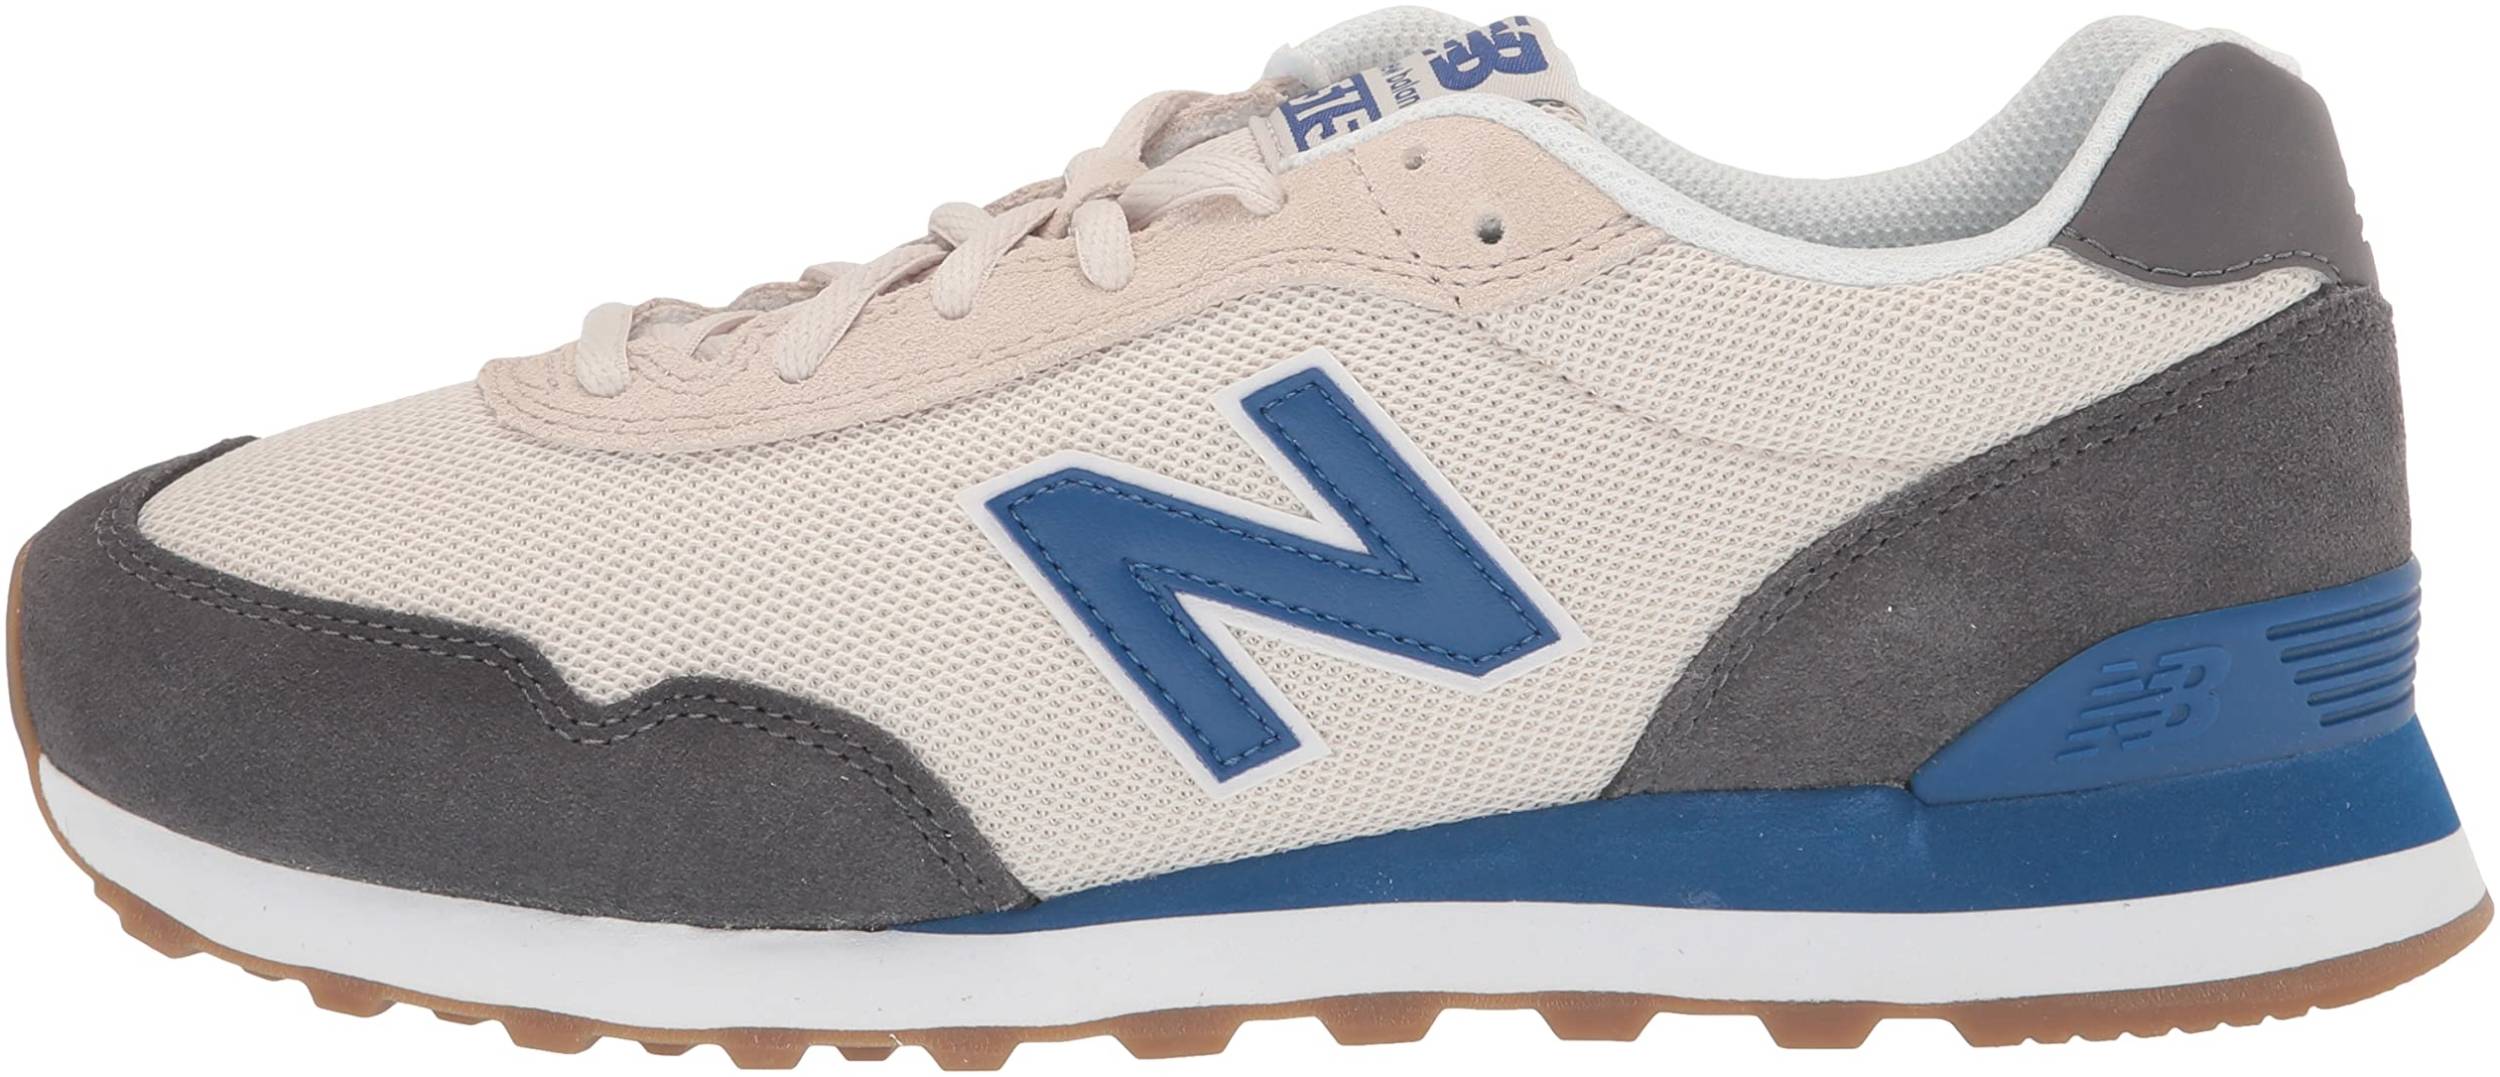 New Balance 515 v3 sneakers in 20+ colors (only $35) | RunRepeat